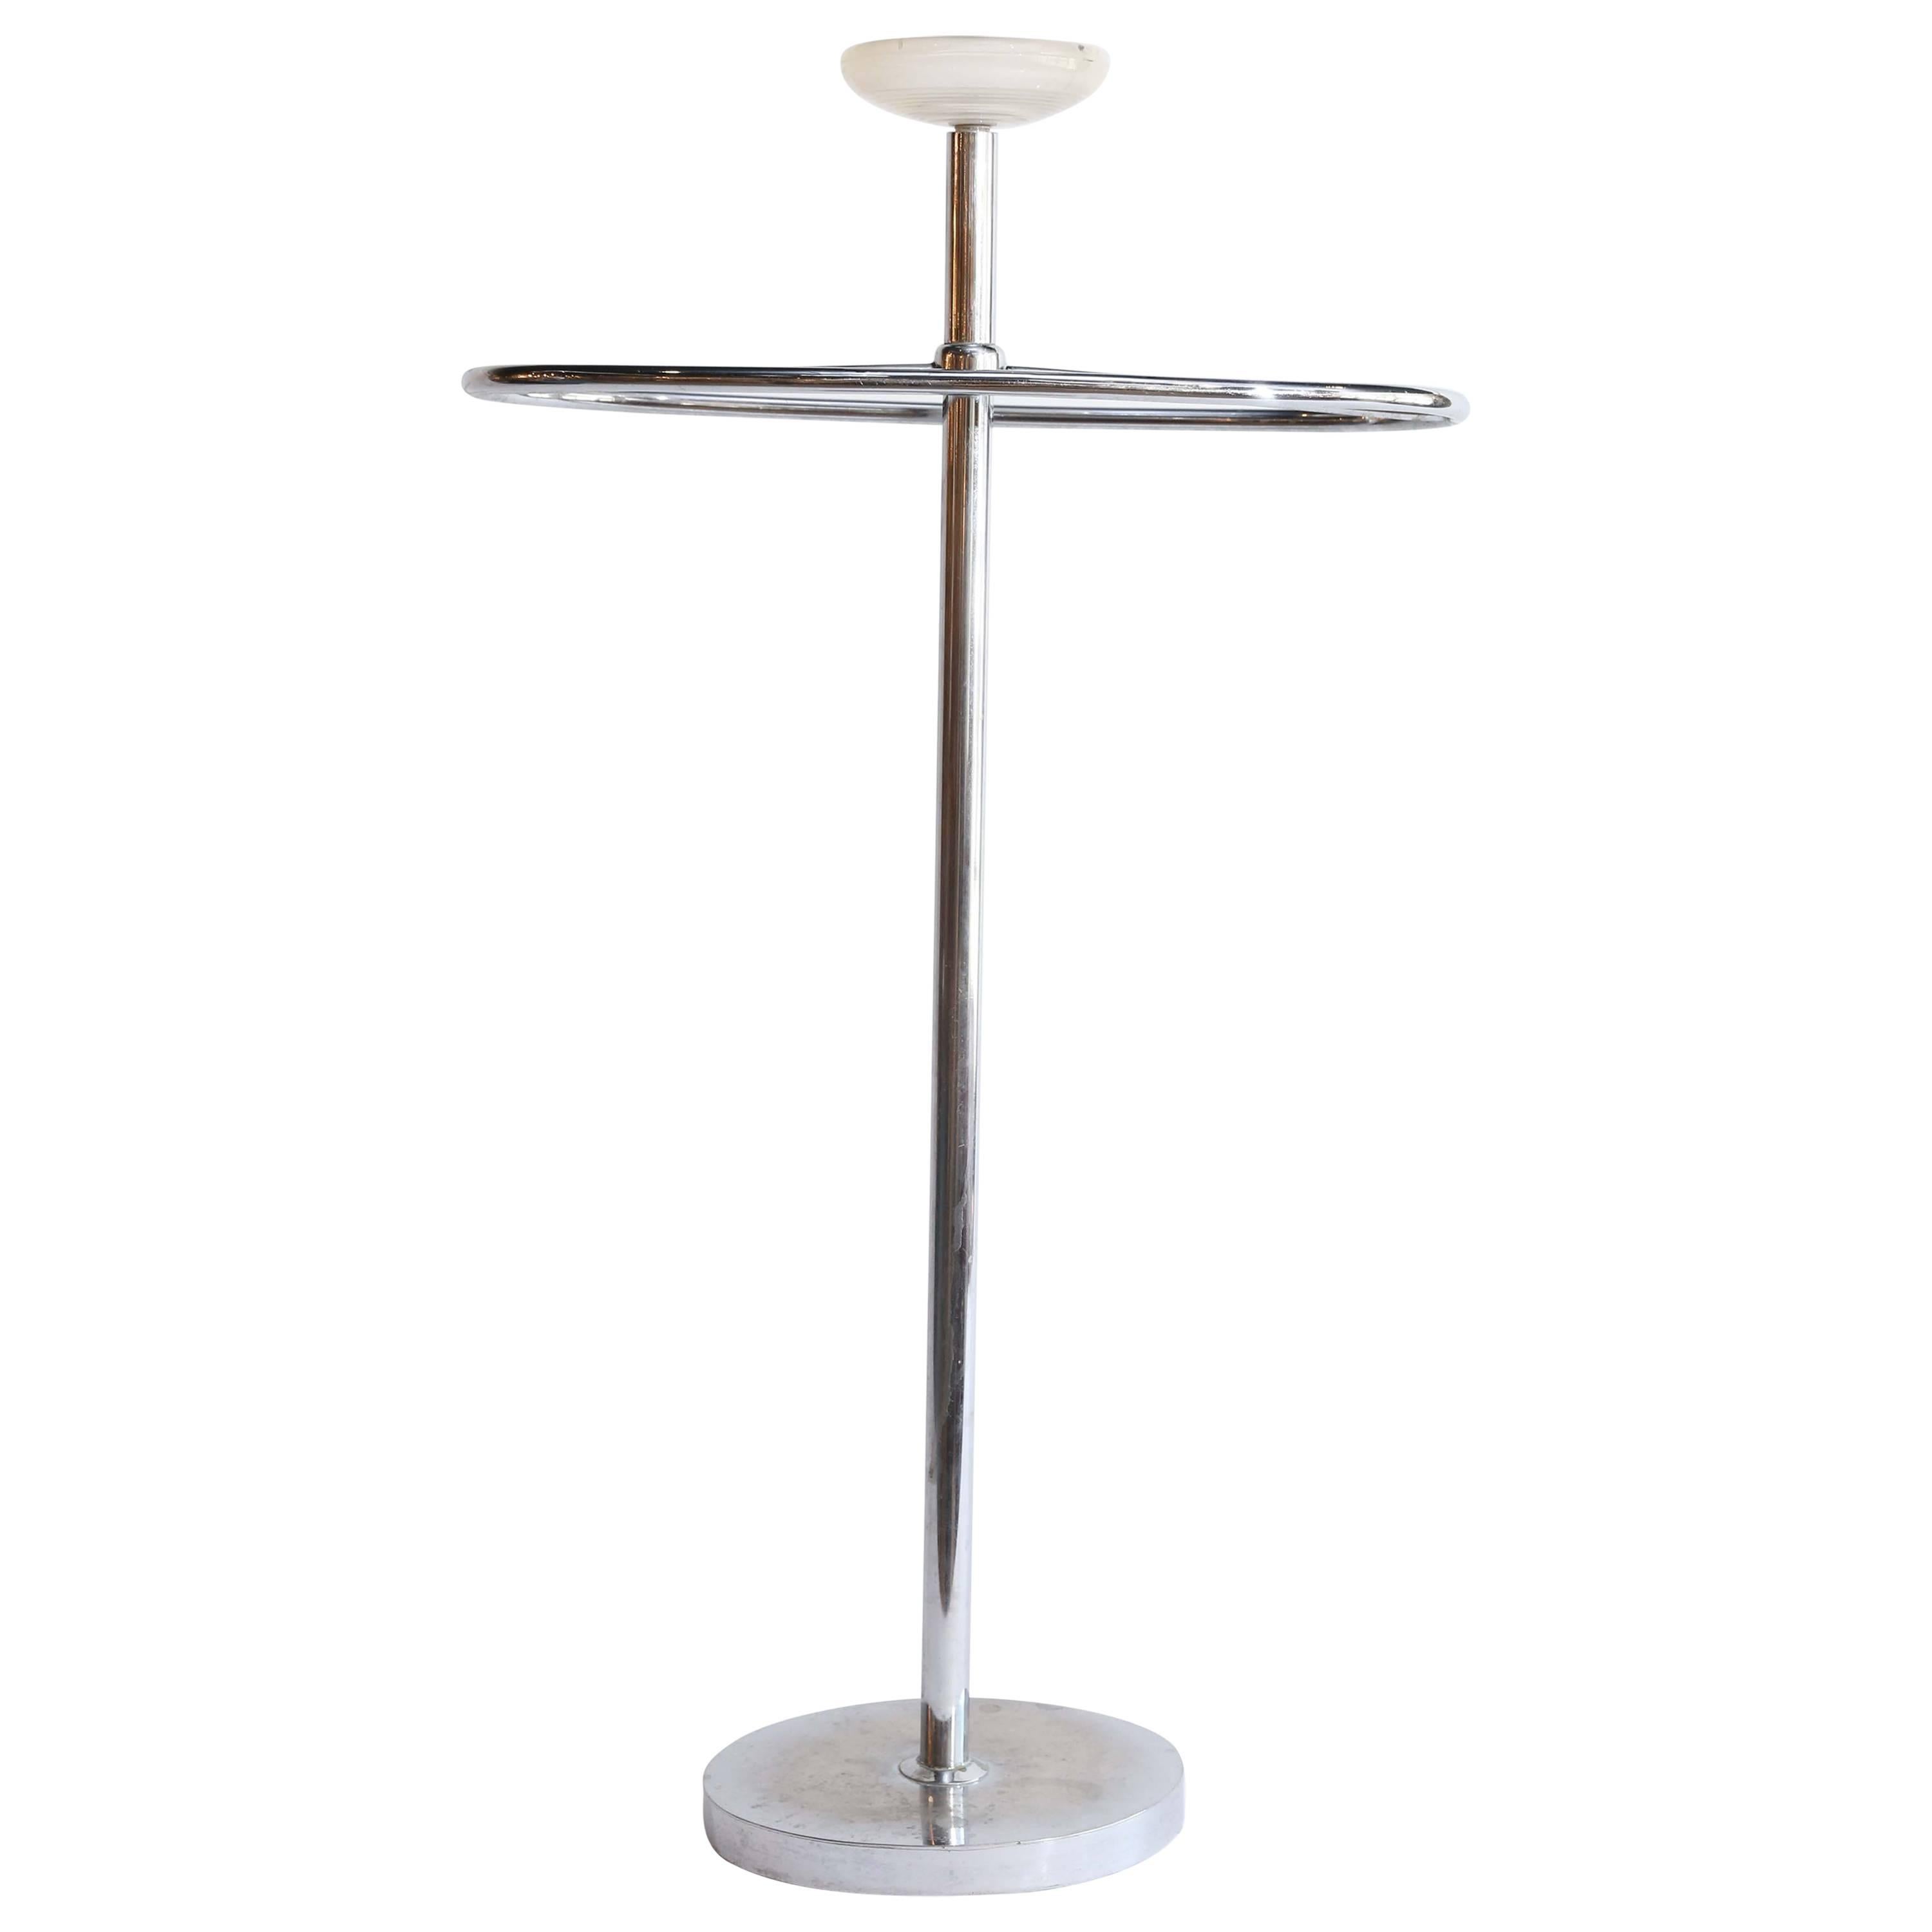 Midcentury Standing Towel Holder from France